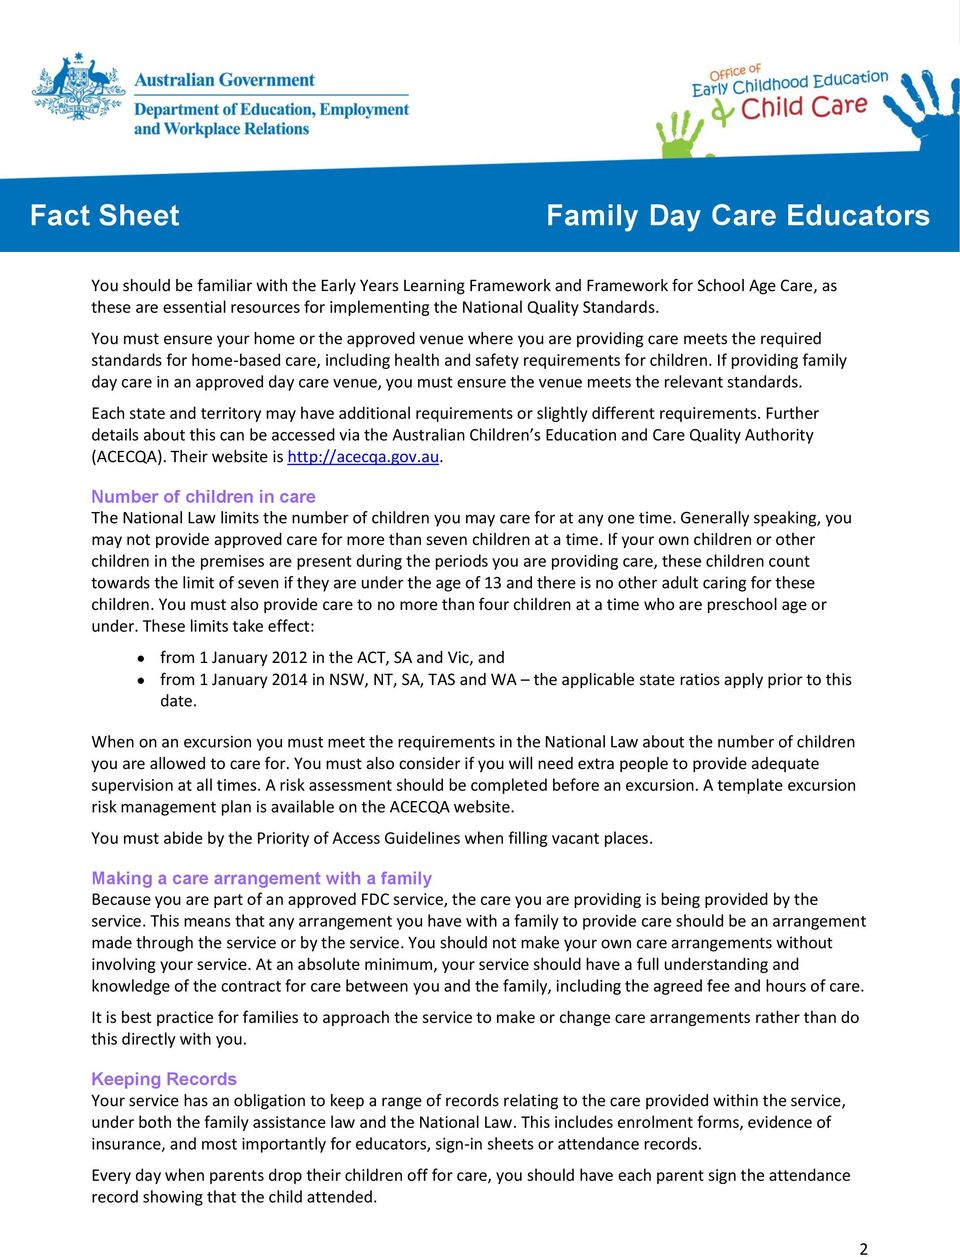 If providing family day care in an approved day care venue, you must ensure the venue meets the relevant standards.